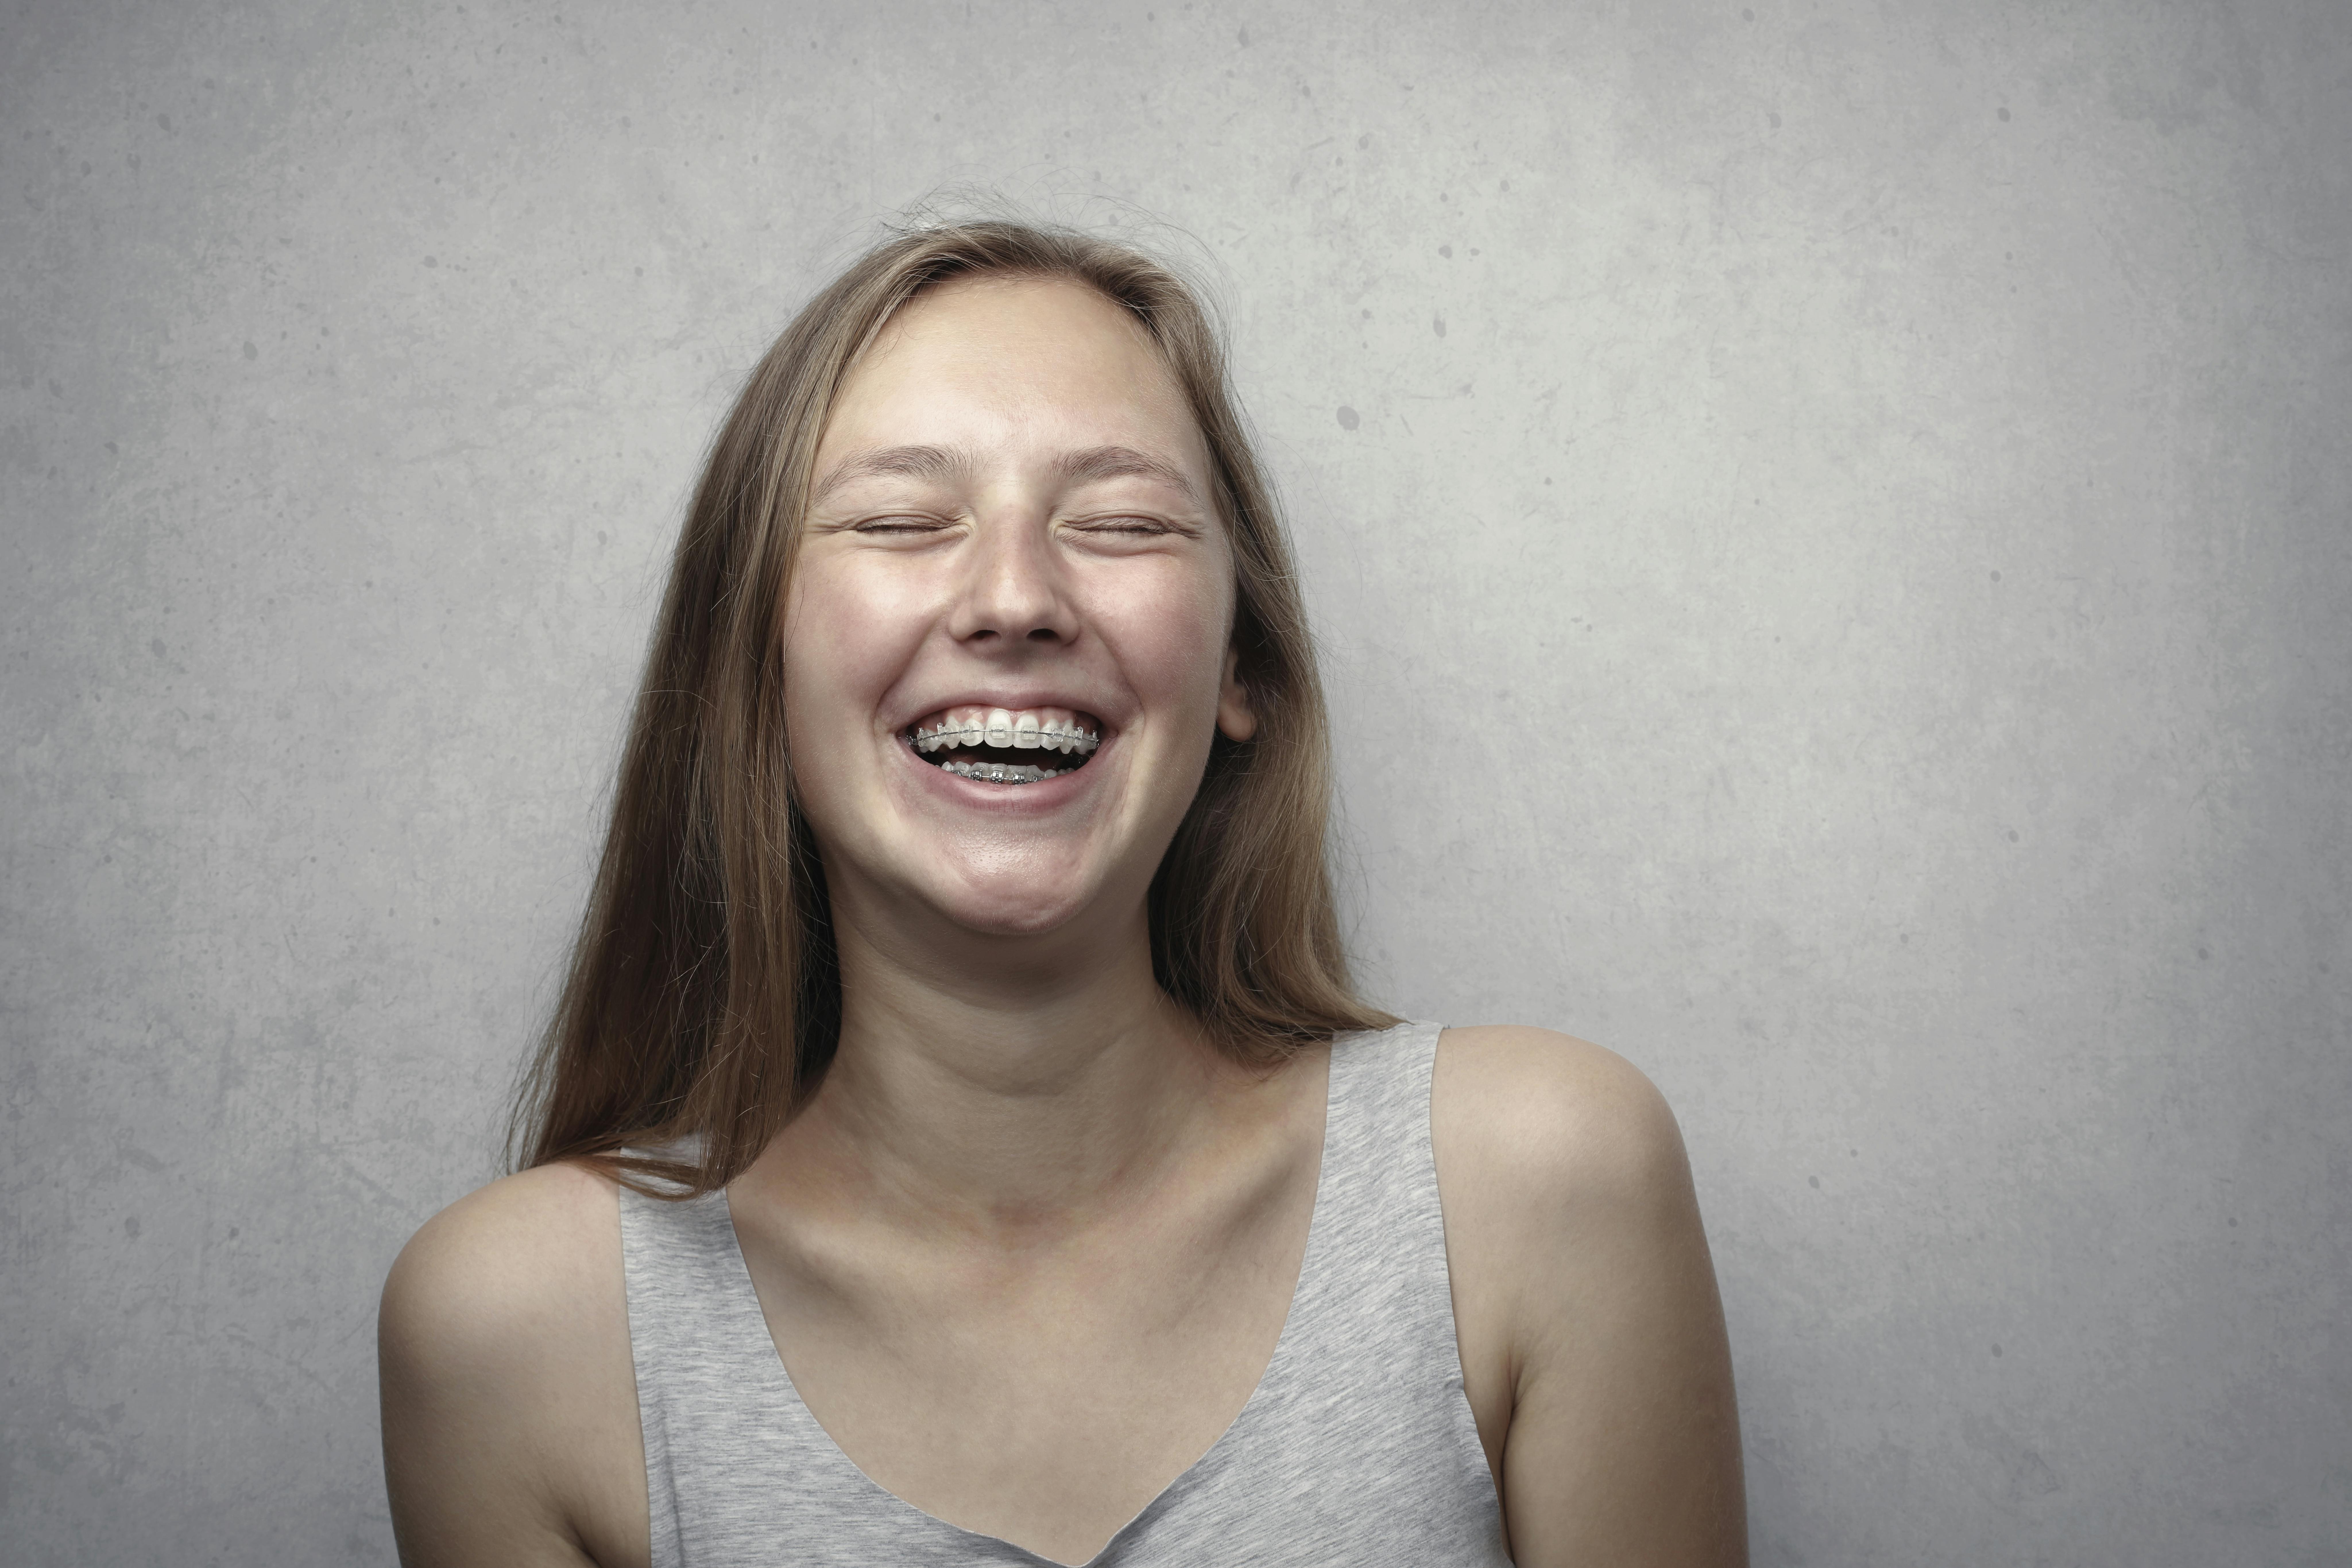 Woman with braces in grey tank top laughing